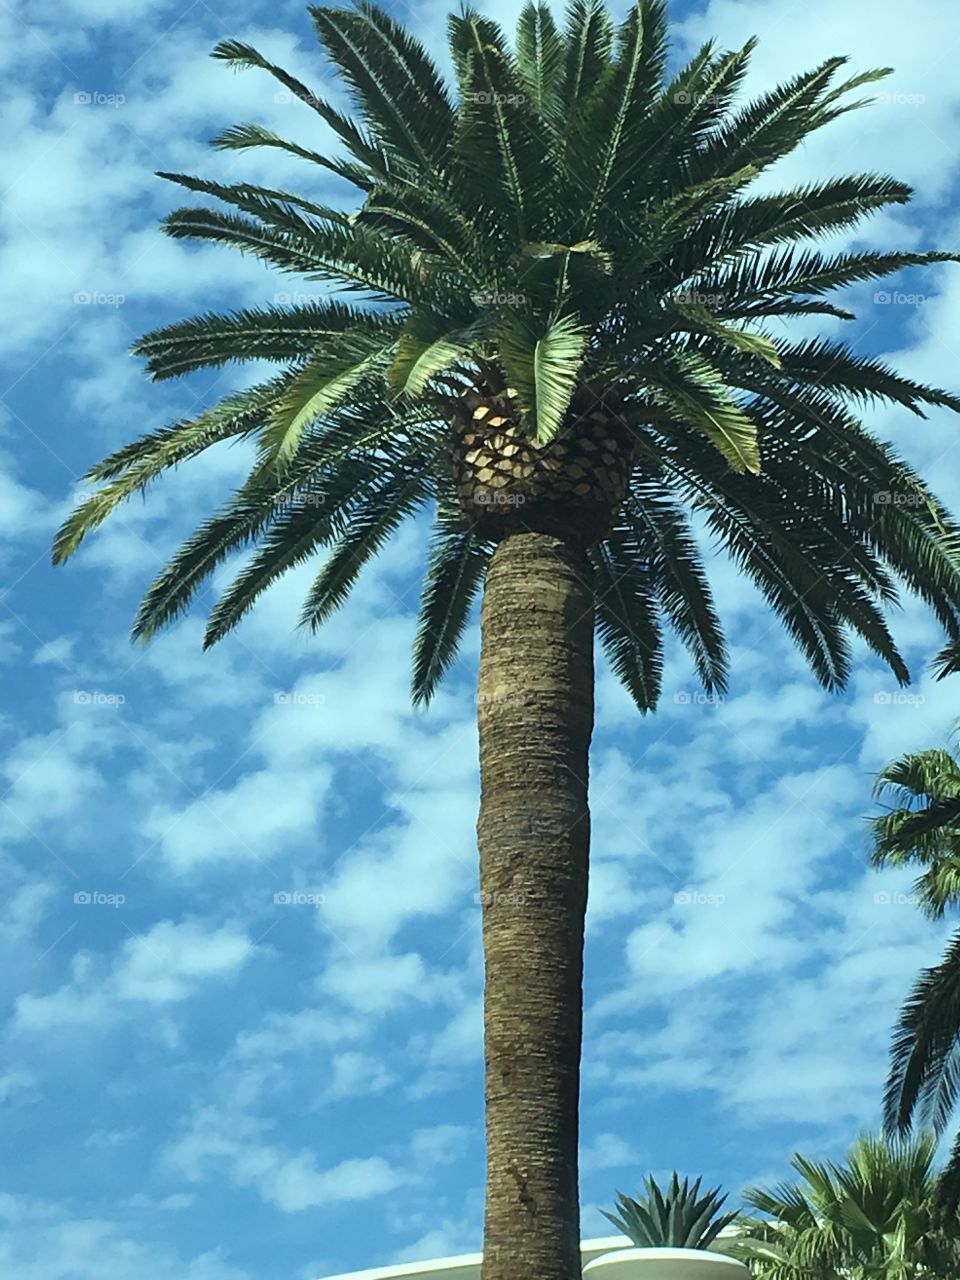 Tall tropical palm tree with blue sky and white clouds in background. 